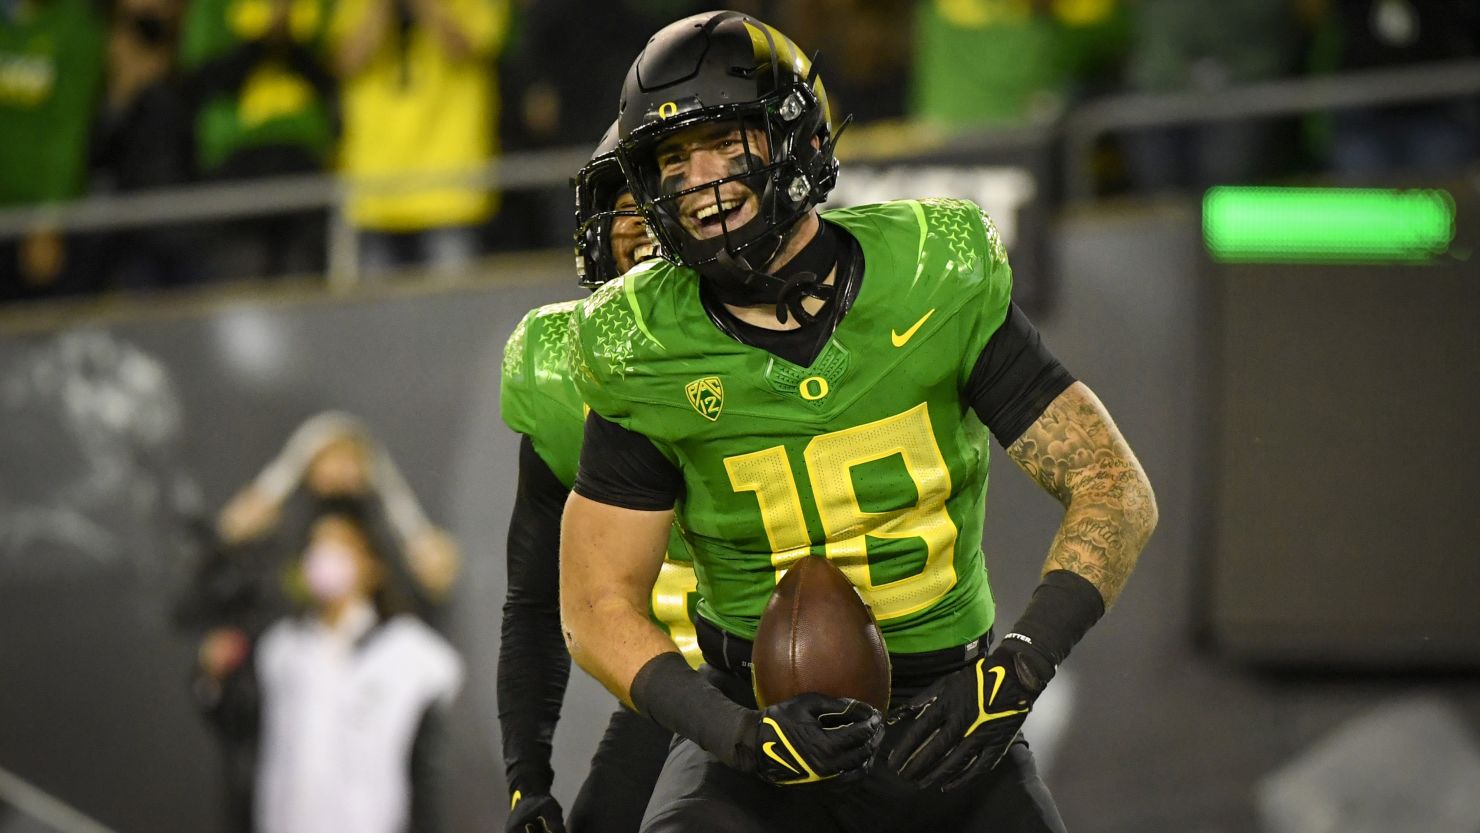 Oregon Ducks football player Spencer Webb dies from head injury after fall